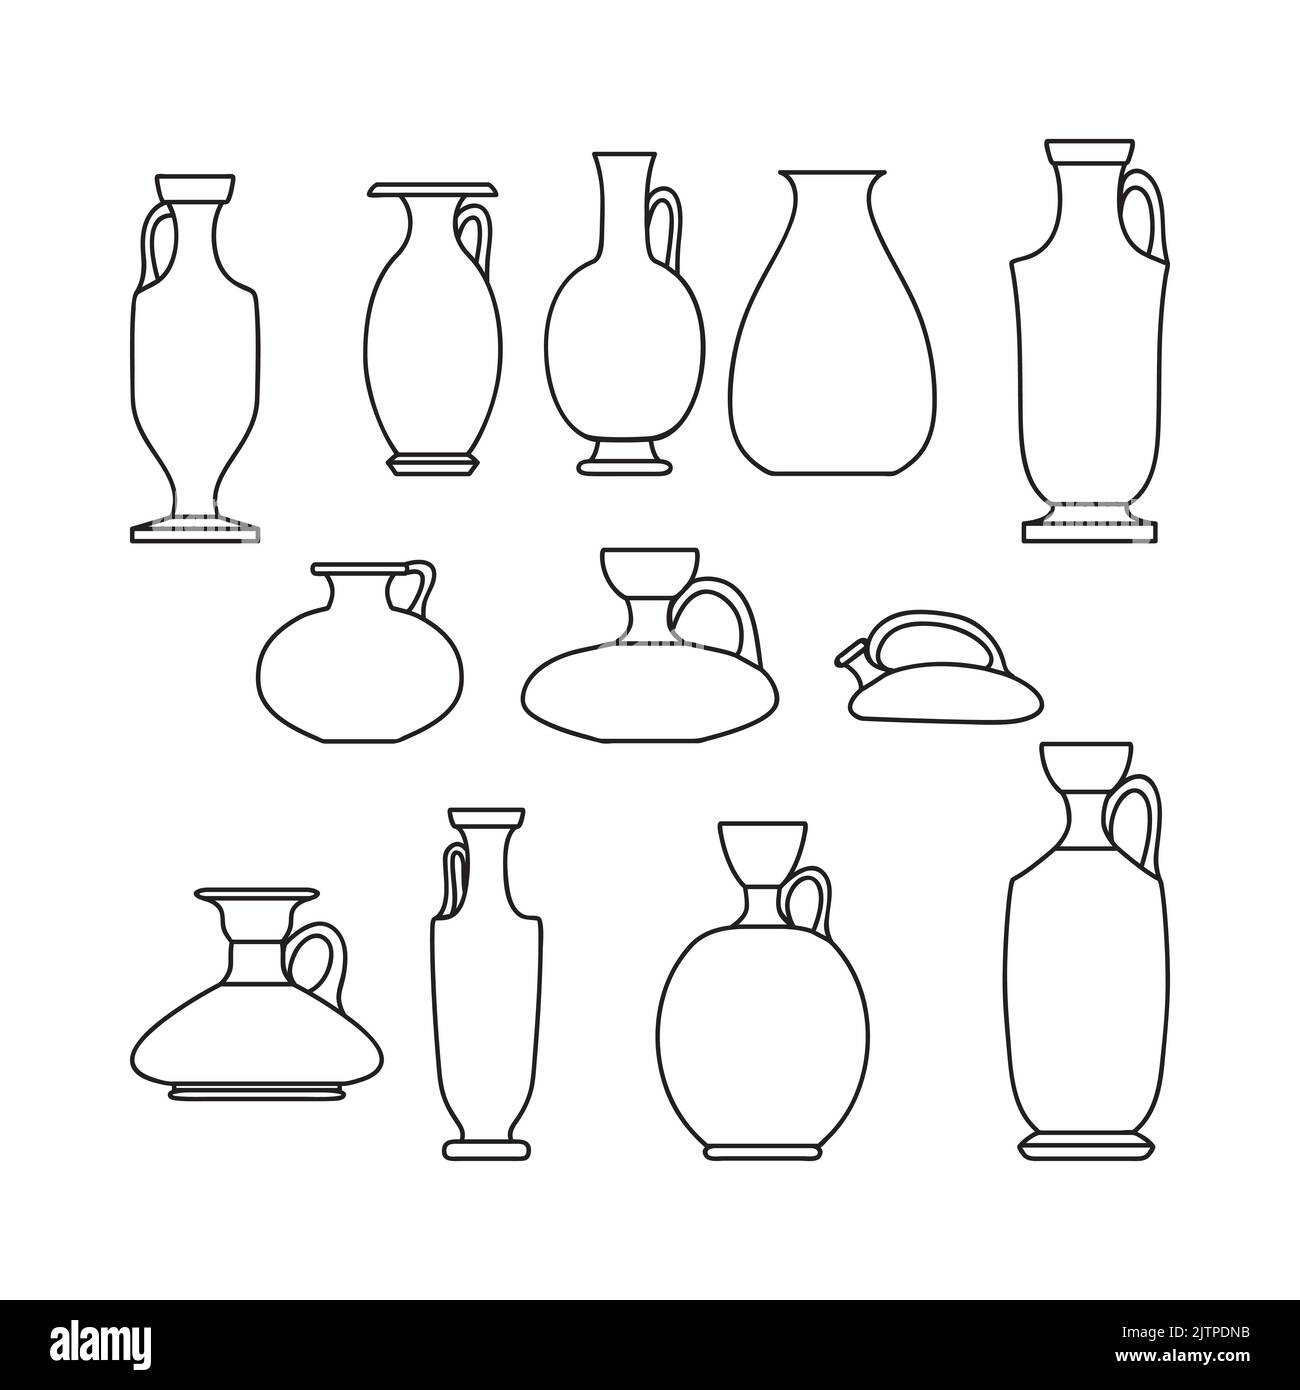 Sketch outline of ceramic vases set. Ancient Greek, Roman jar with two handles and a narrow neck. Line art vintage amphora, pots, cups isolated black Stock Vector